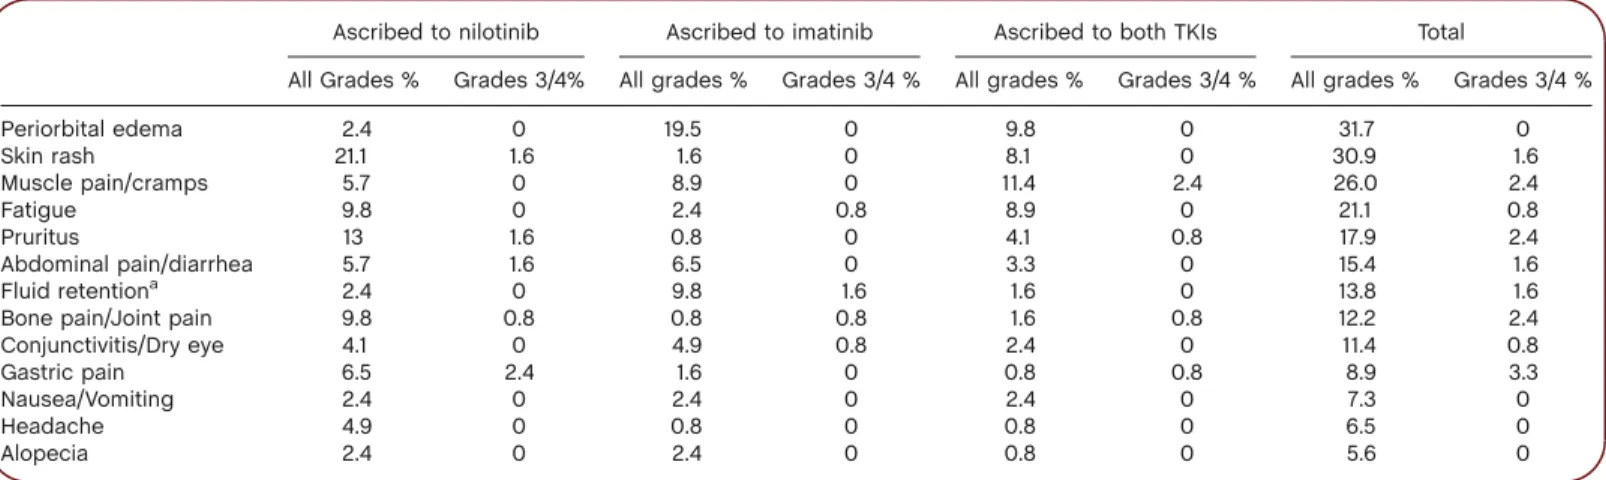 TABLE III. Adverse Events Observed During the First Year of Study, According to Treatment (Nilotinib Only, Imatinib Only, Both Nilotinib and Imatinib) Ascribed to nilotinib Ascribed to imatinib Ascribed to both TKIs Total